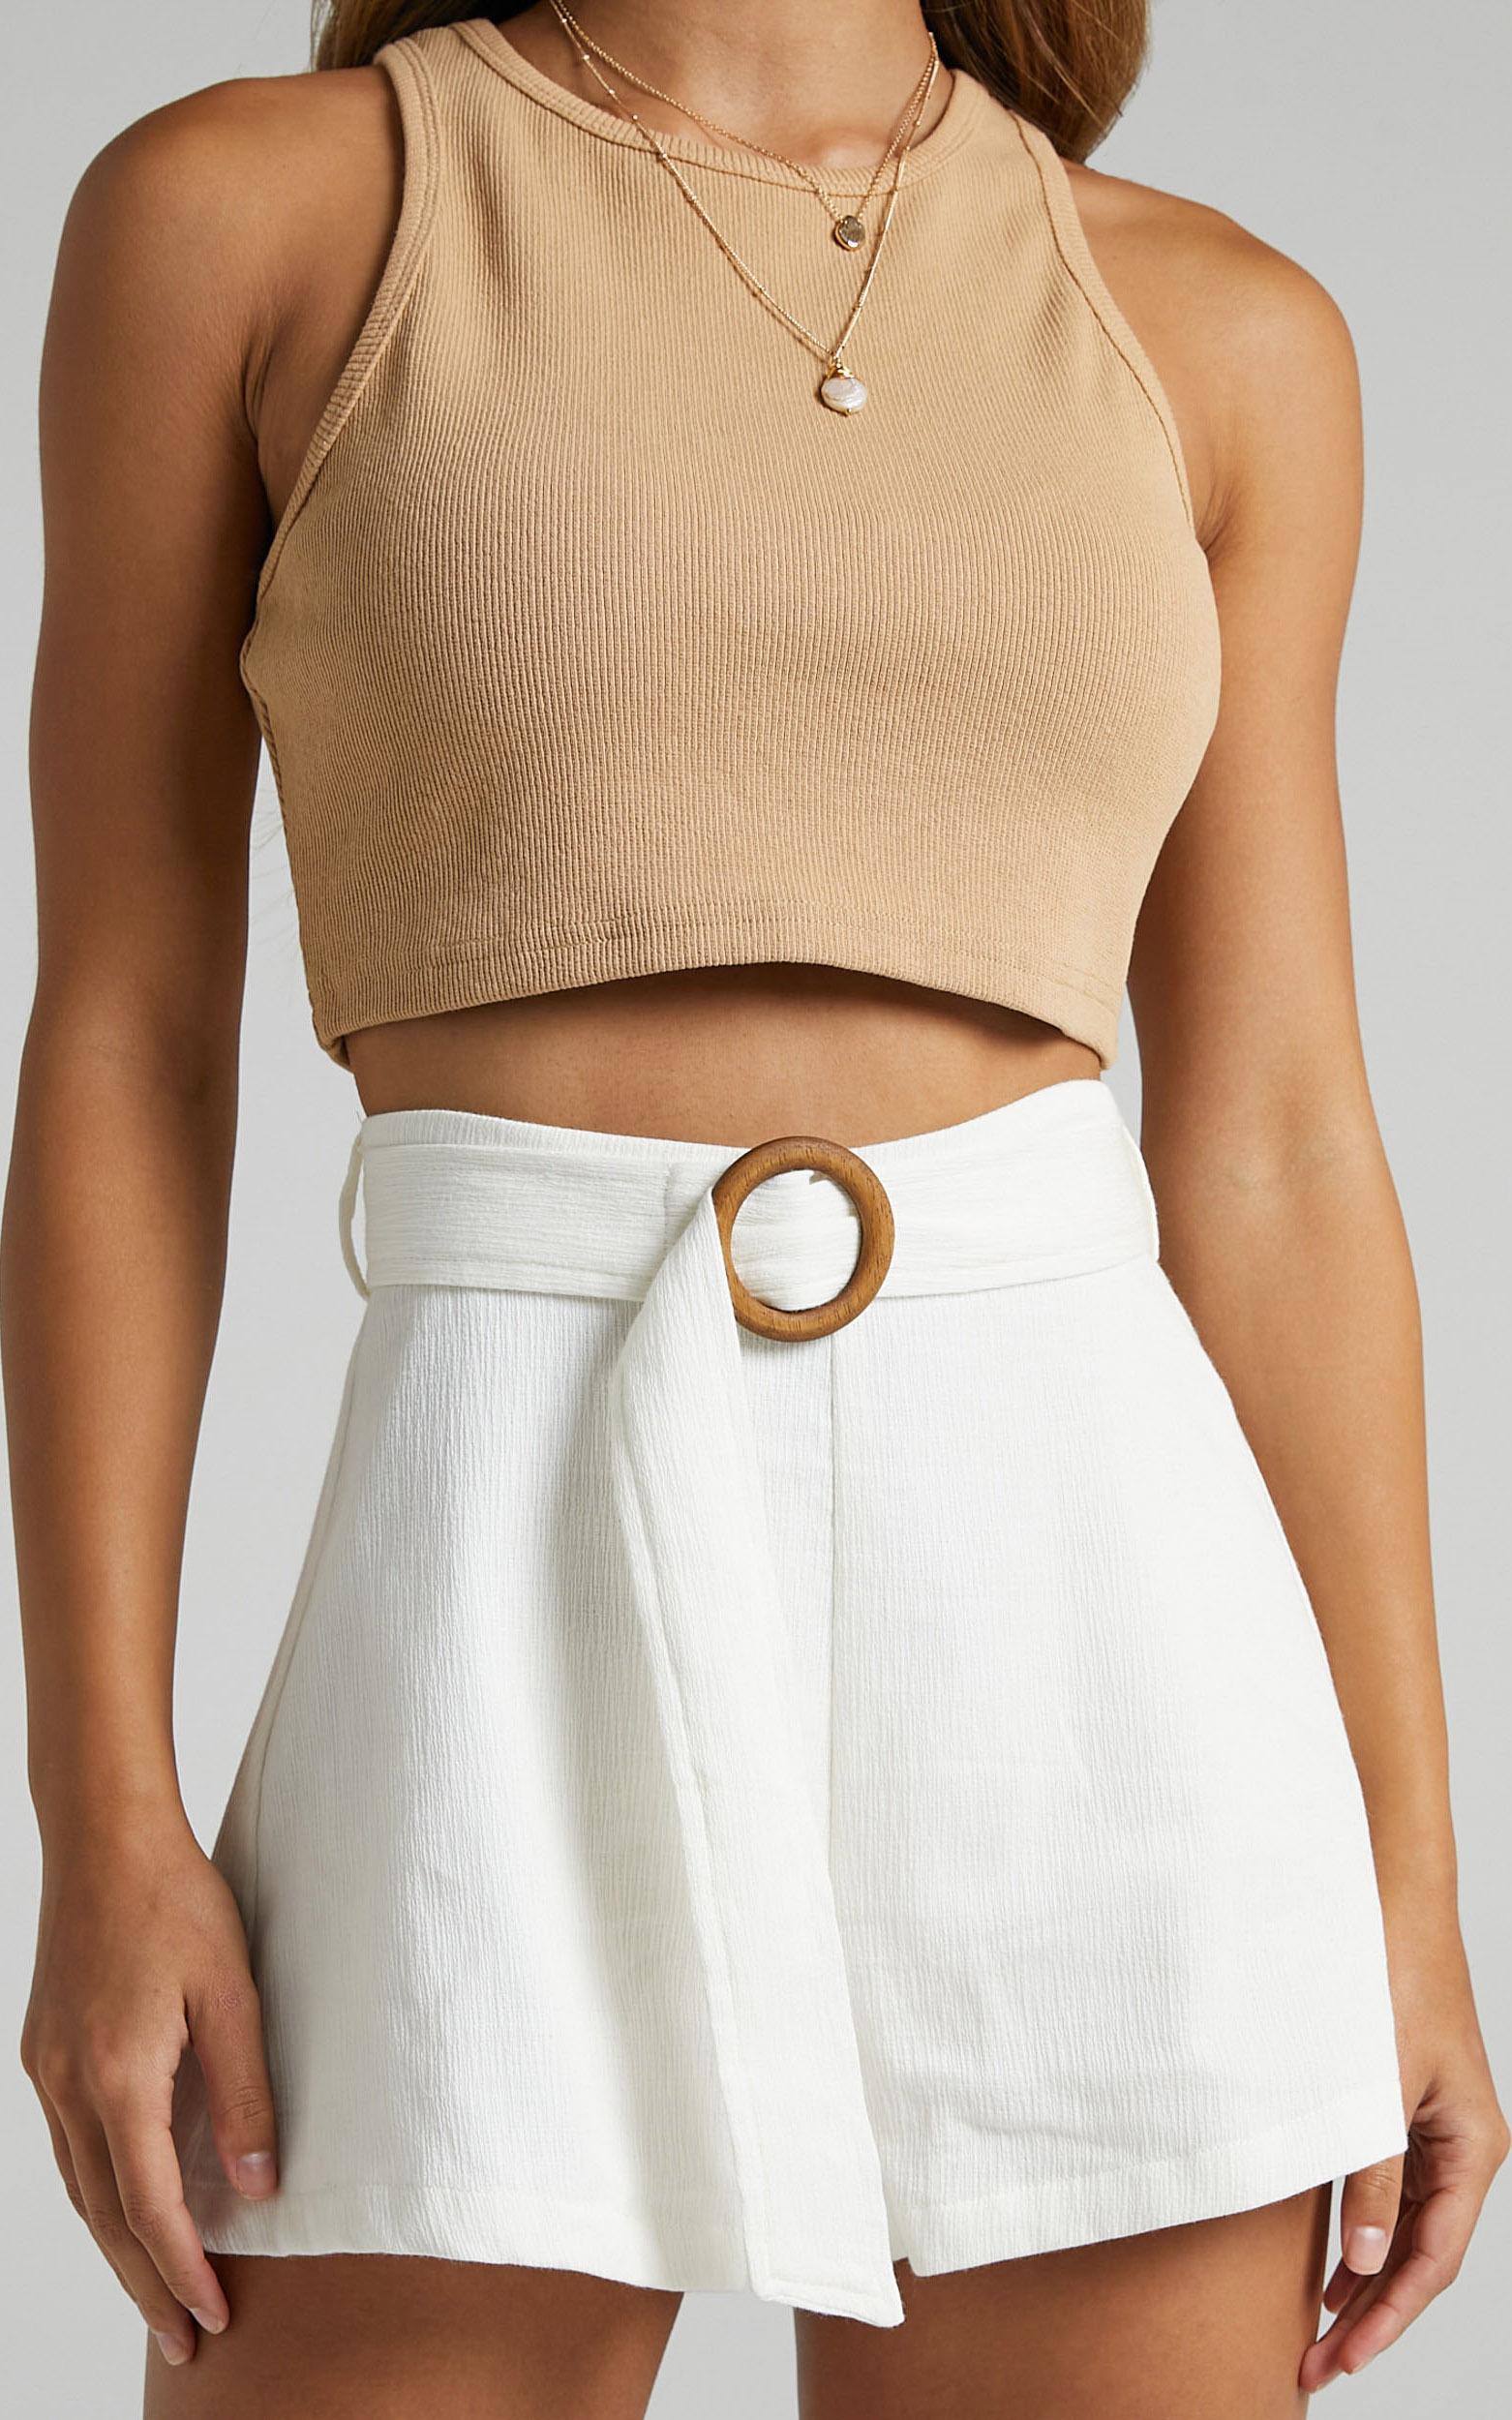 Devera Belted High Waist Shorts in Off White - 06, WHT1, hi-res image number null